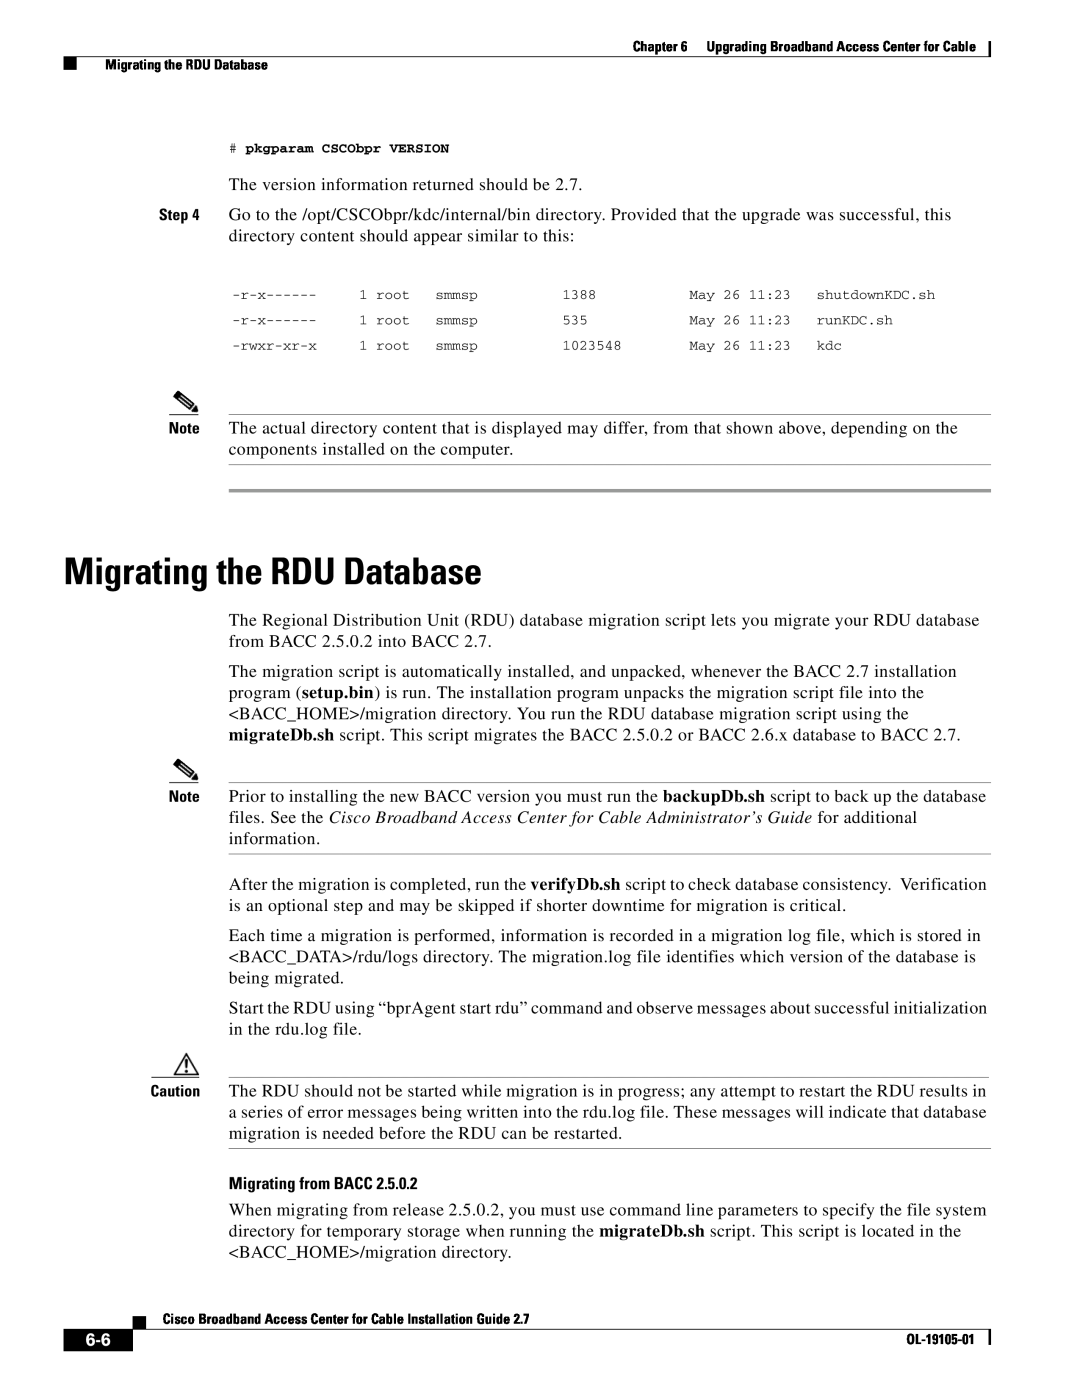 Cisco Systems Broadband Access Center manual Migrating the RDU Database, Migrating from BACC 